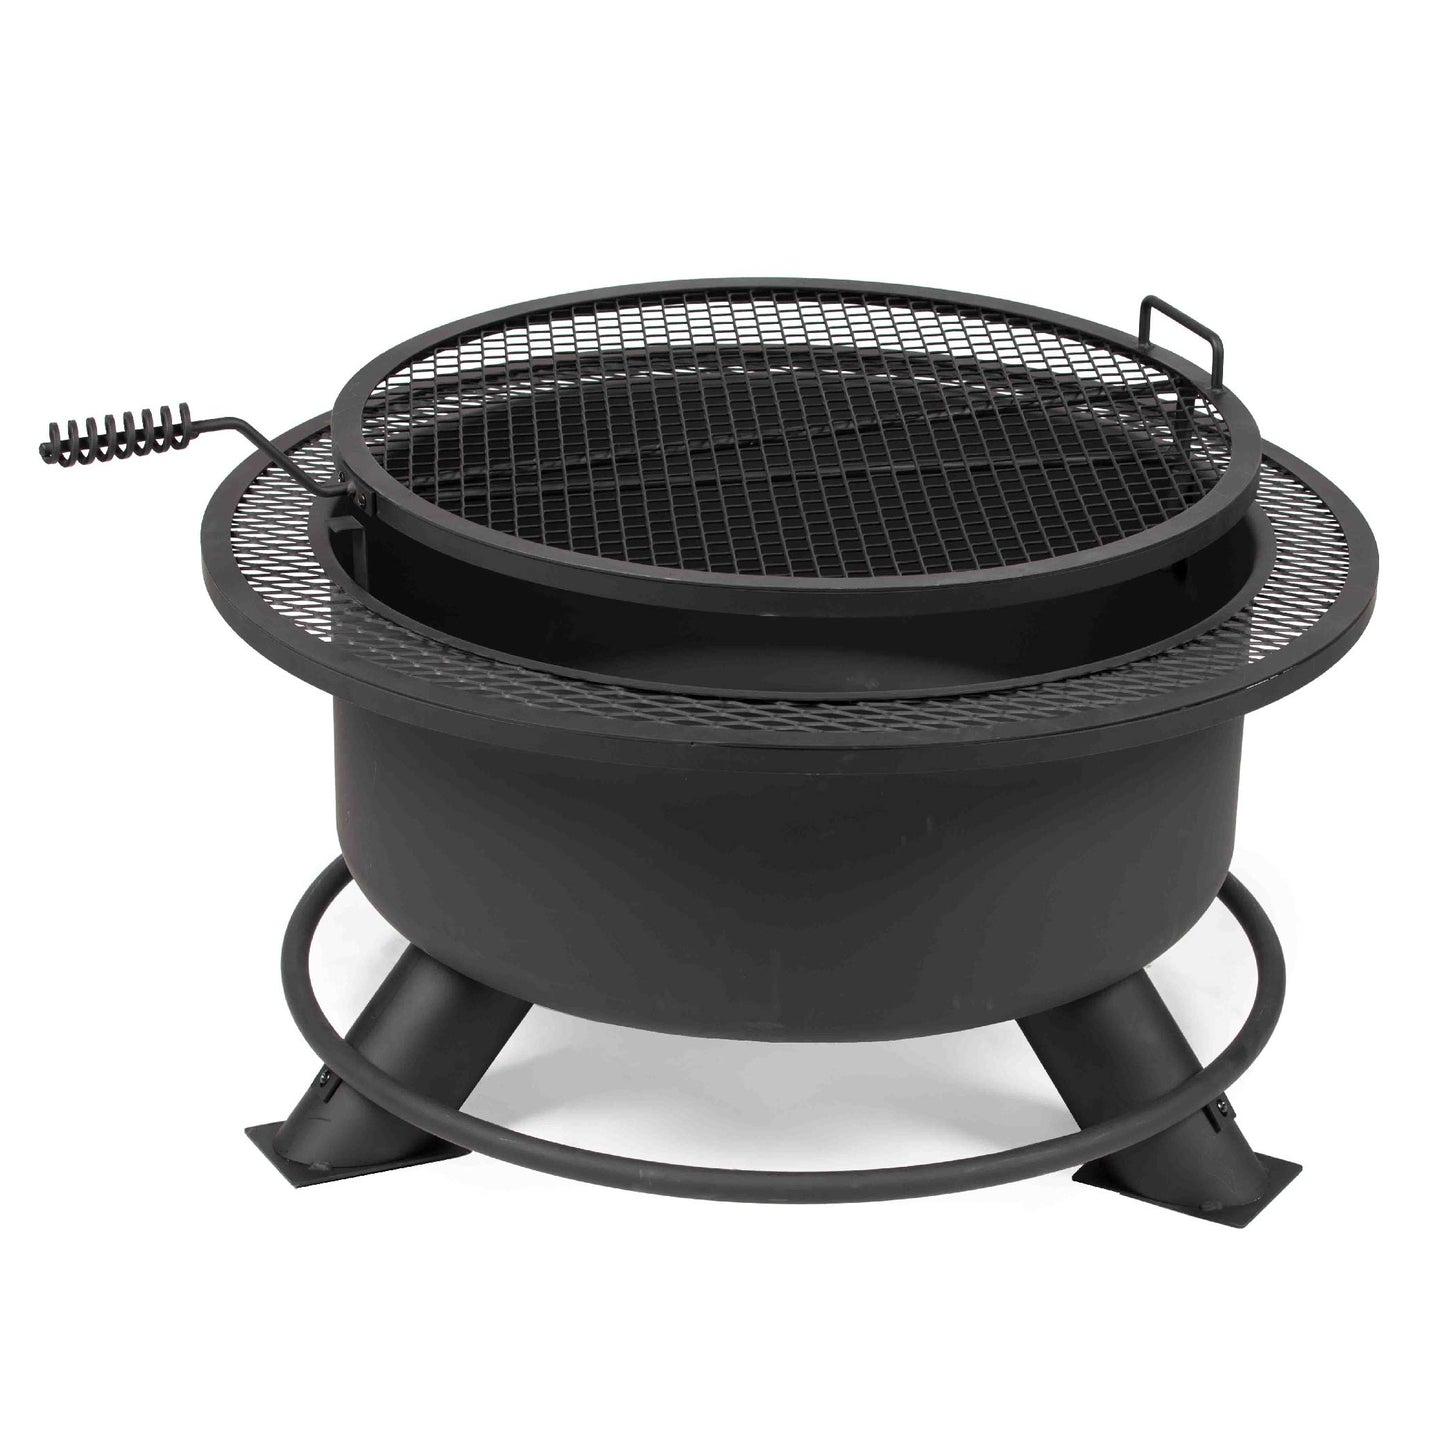 38" Fire Pit with Swivel Grate - view 1